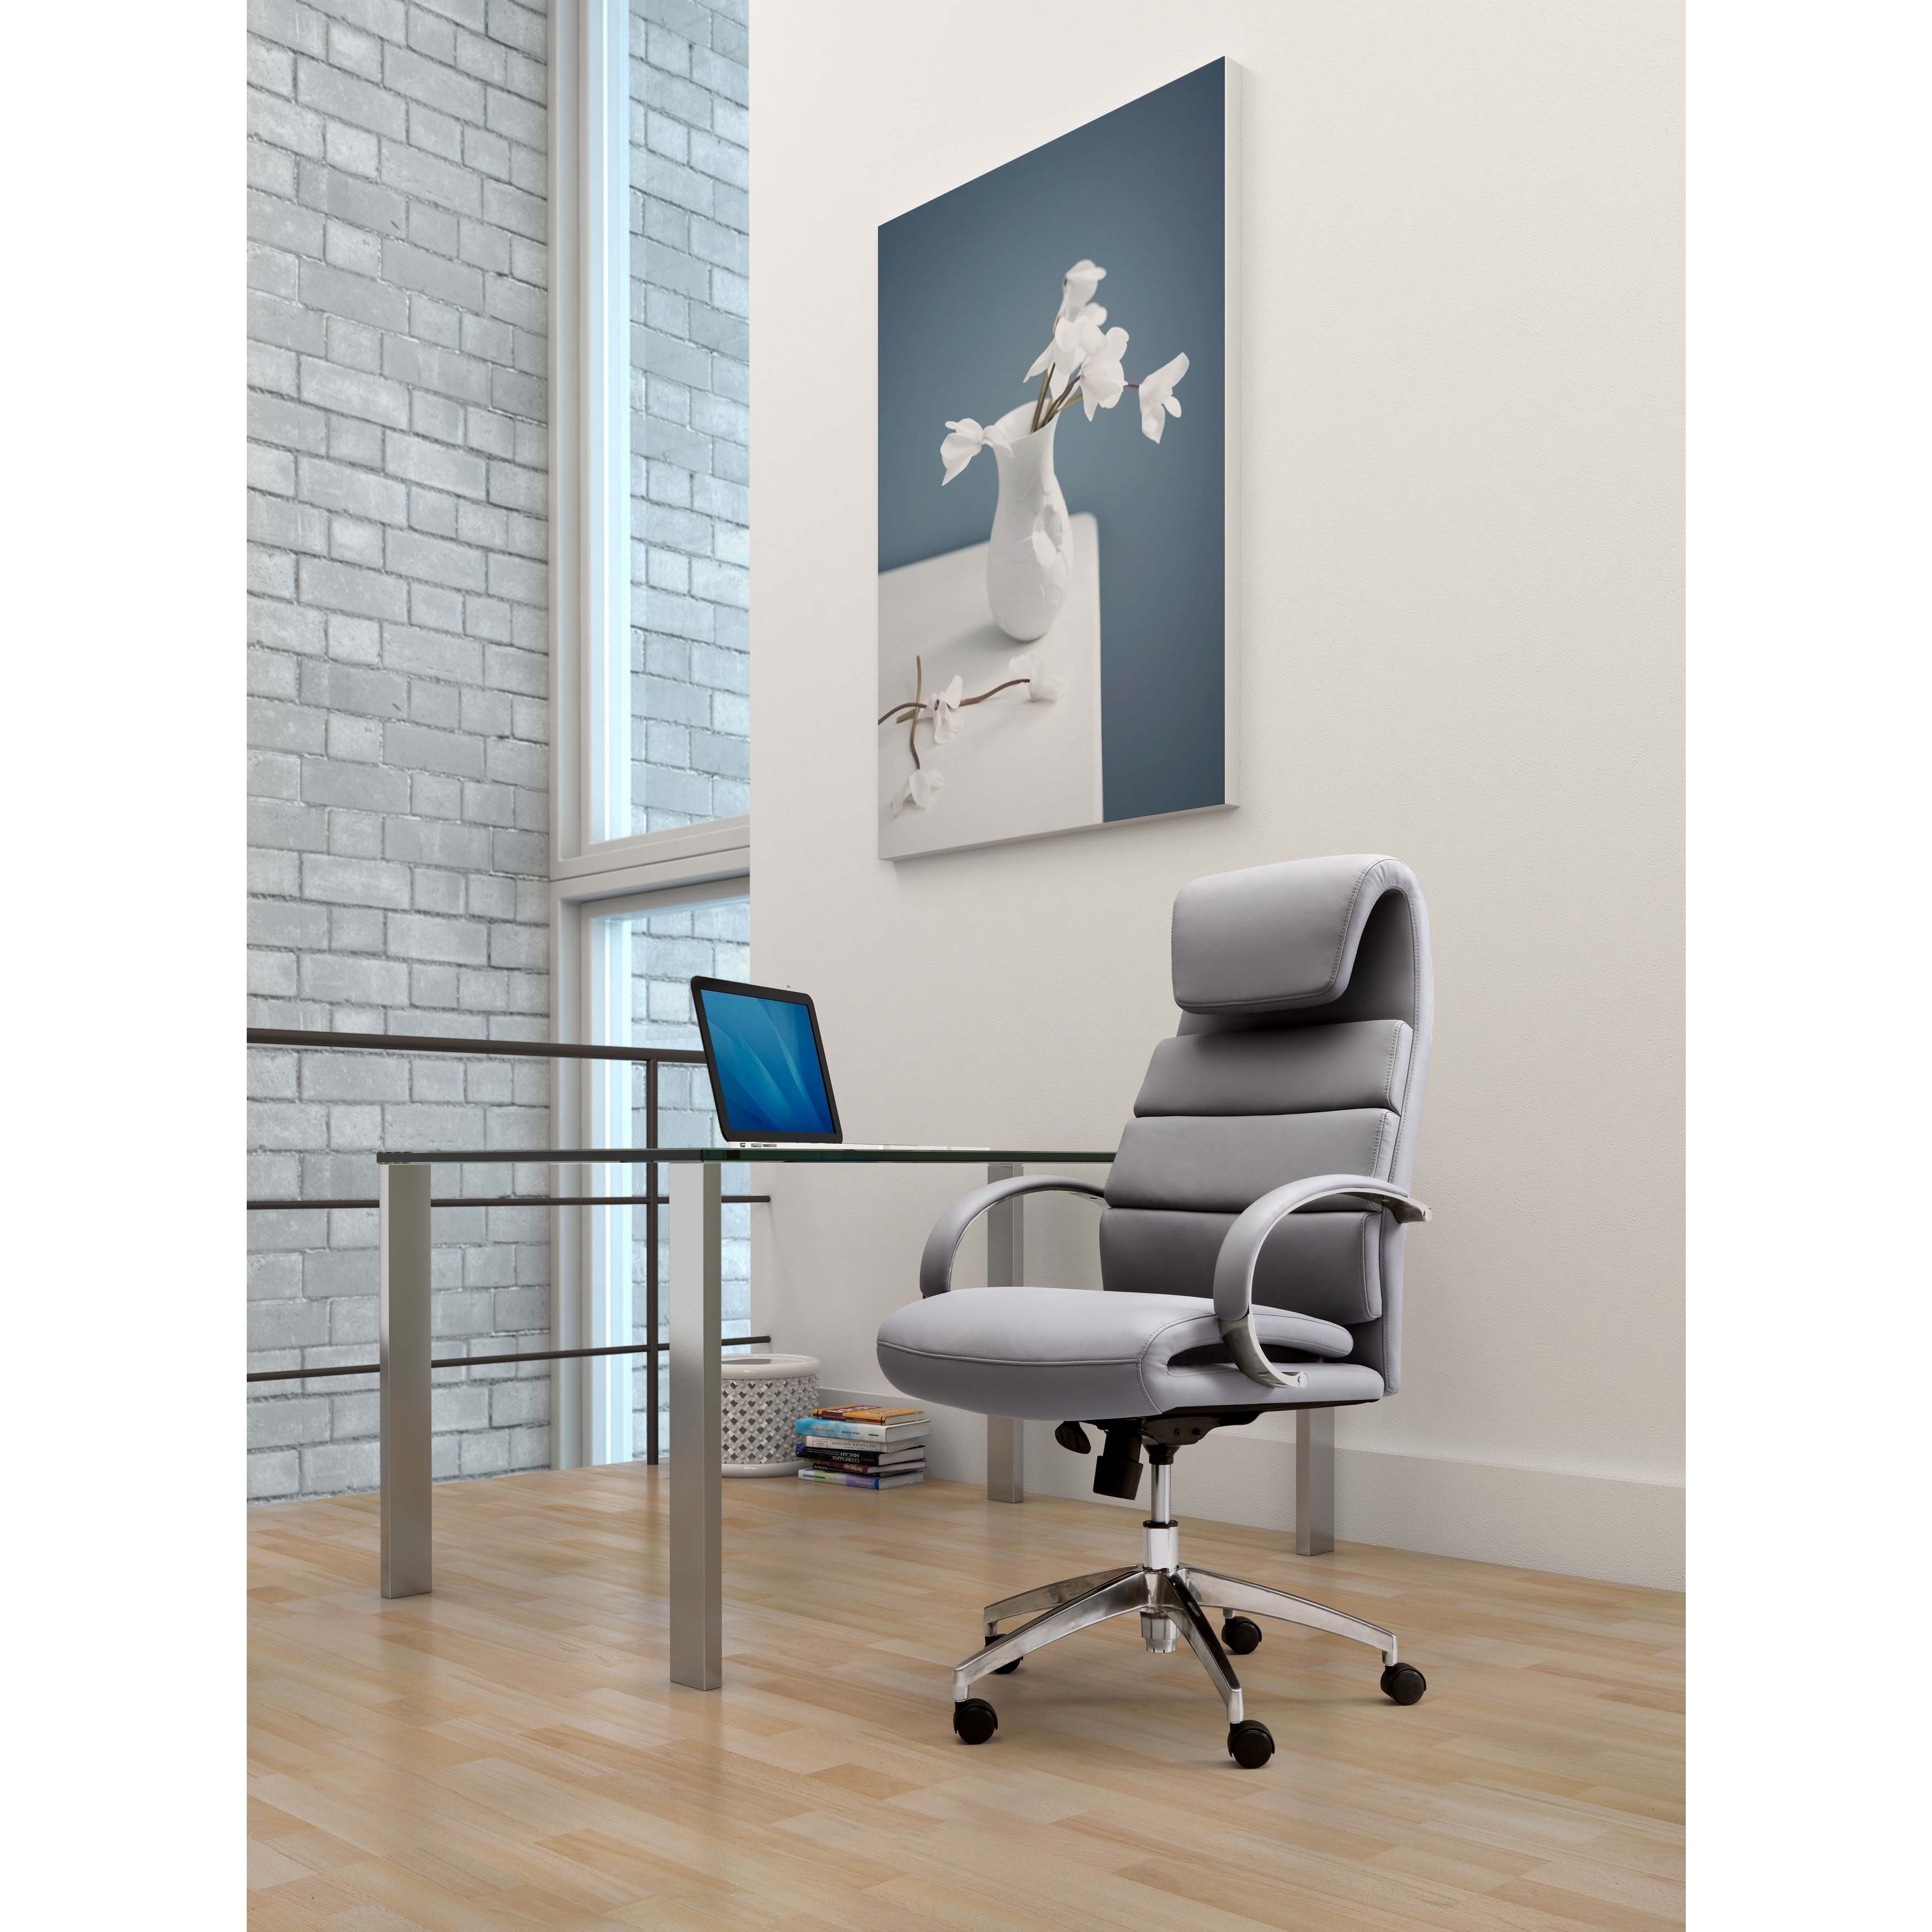 Lider Comfort White Office Chair